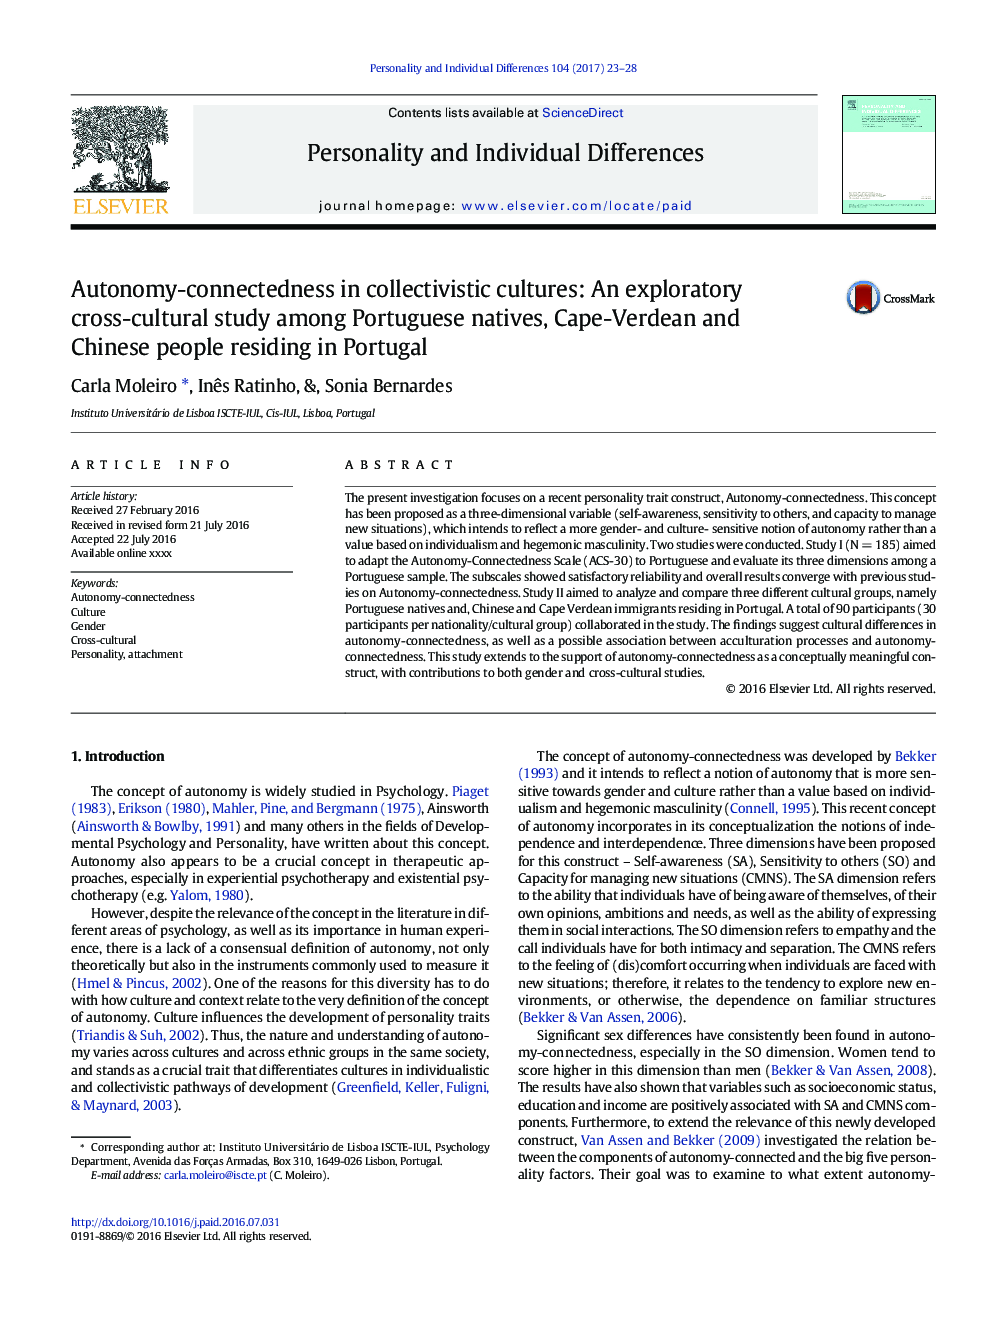 Autonomy-connectedness in collectivistic cultures: An exploratory cross-cultural study among Portuguese natives, Cape-Verdean and Chinese people residing in Portugal